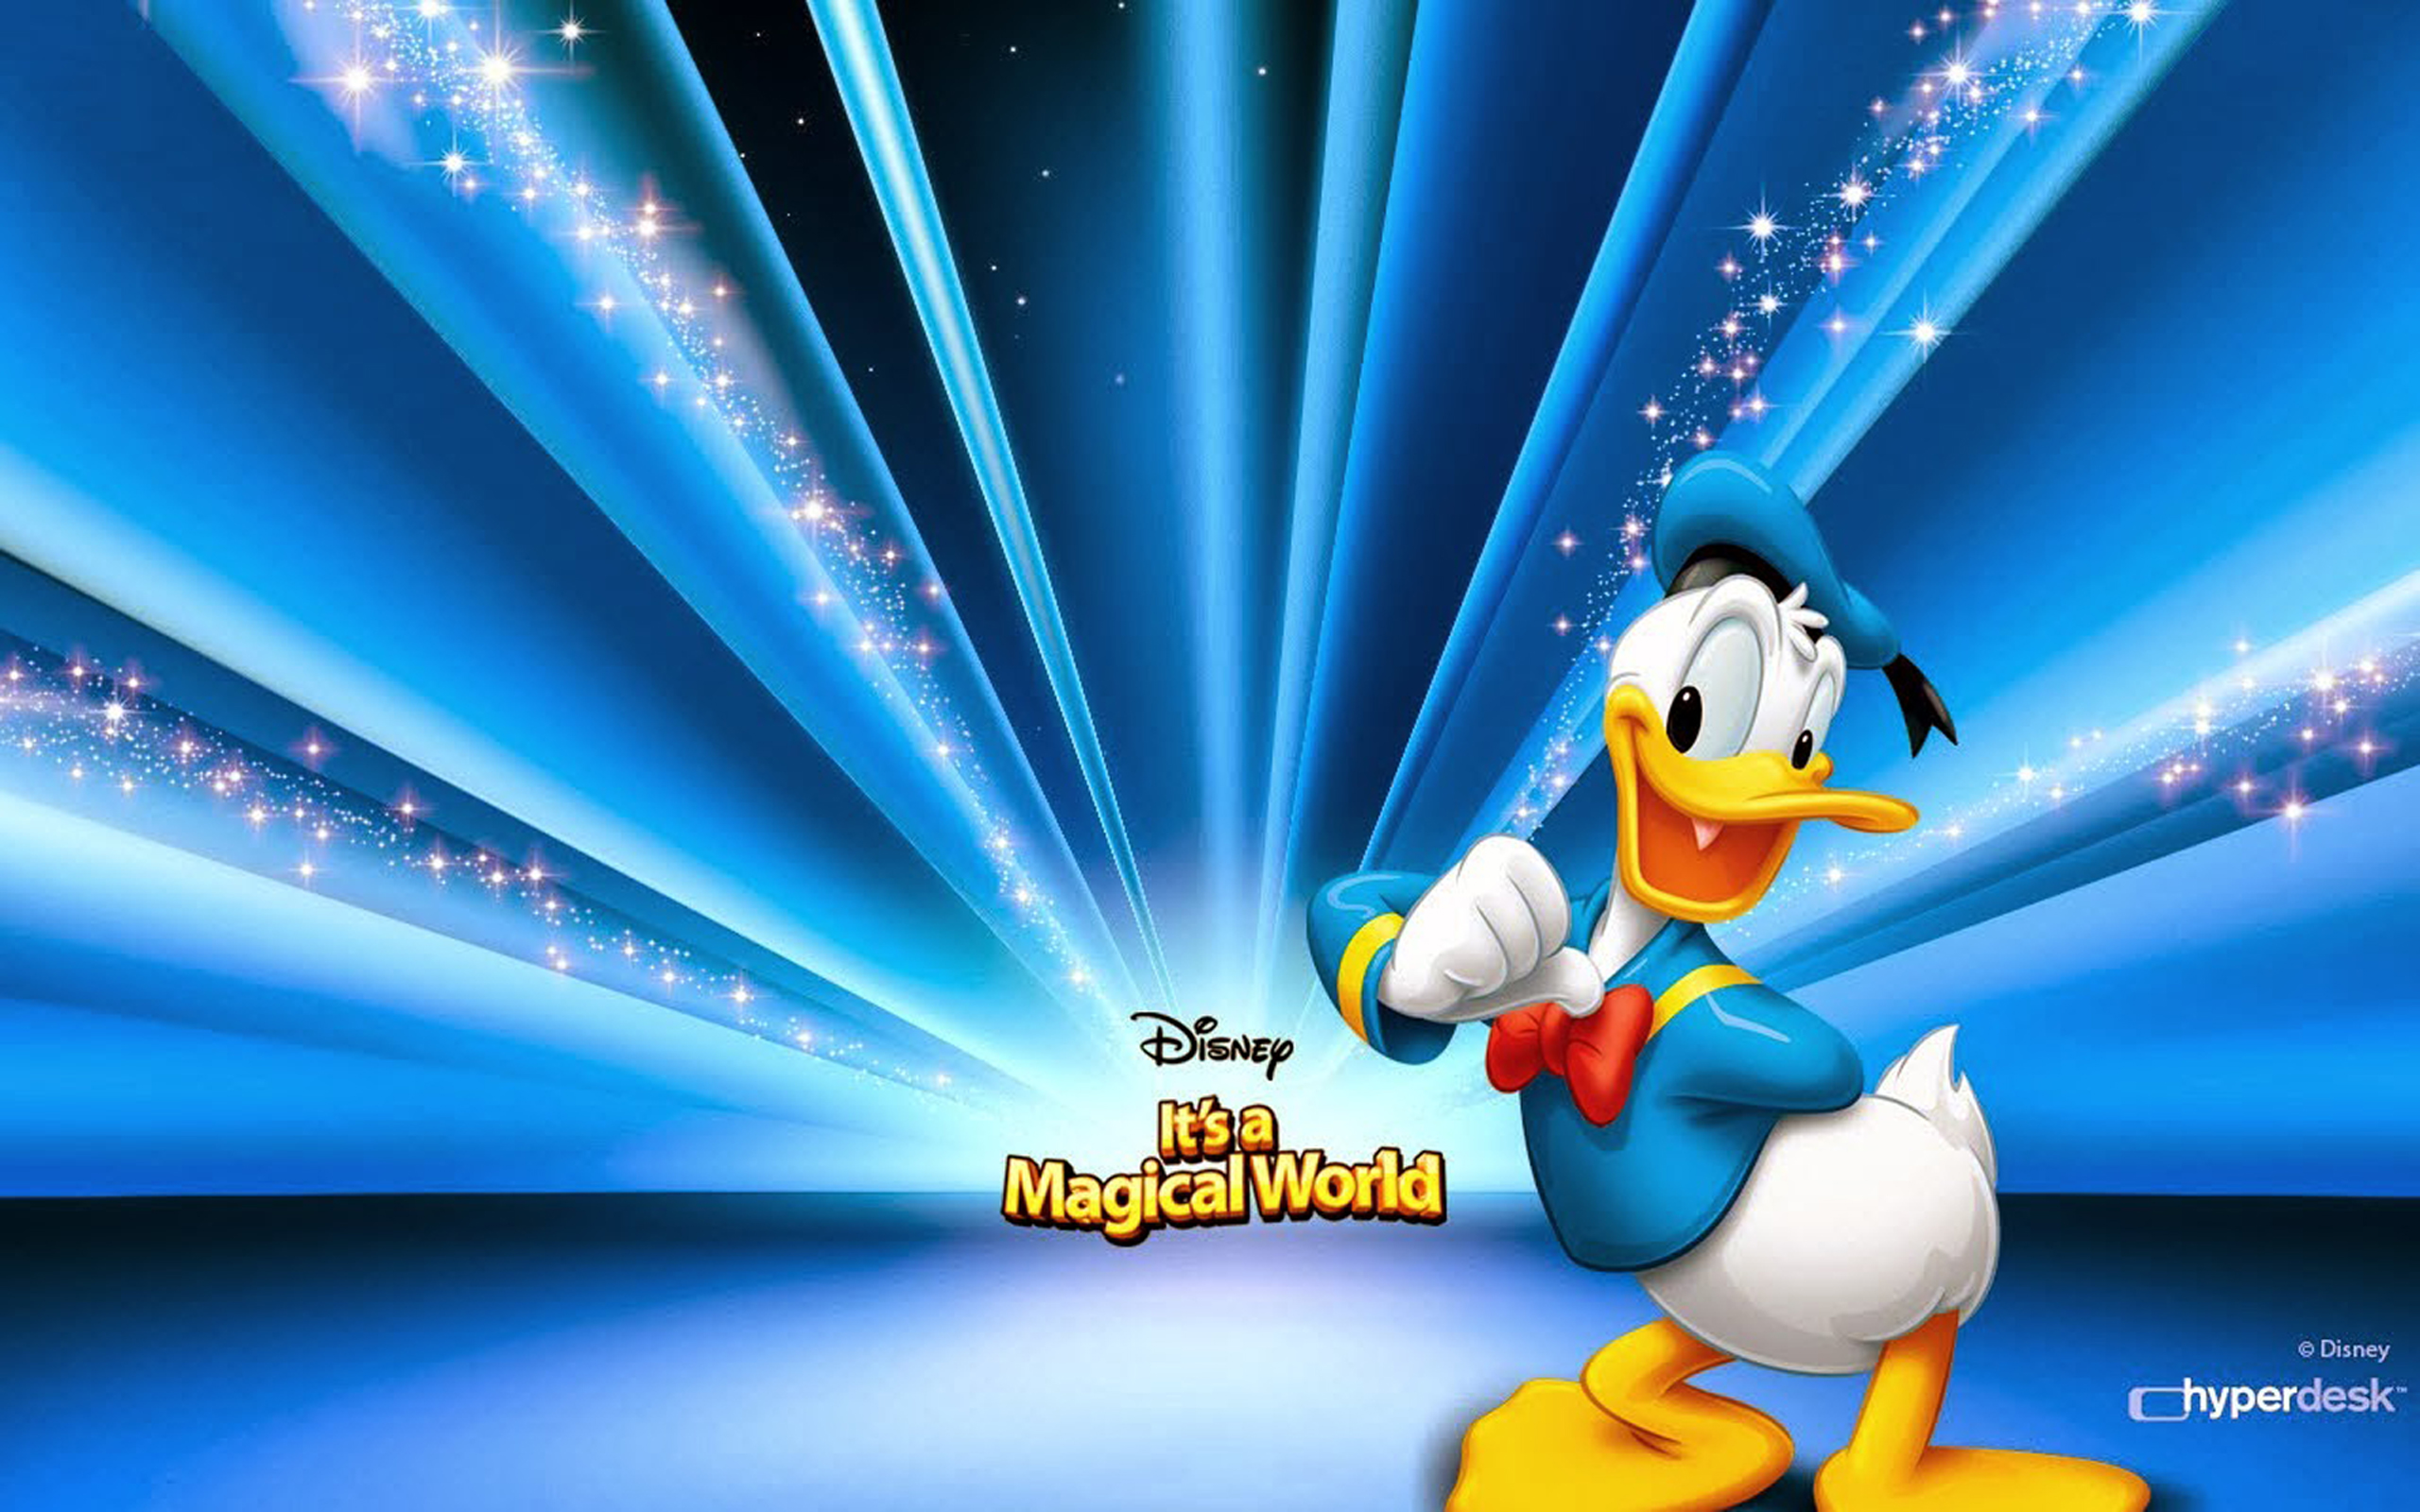 Disney It'sa Magical World Donald Duck Desktop Hd Wallpaper For Pc Tablet  And Mobile Download 2560x1600 : 